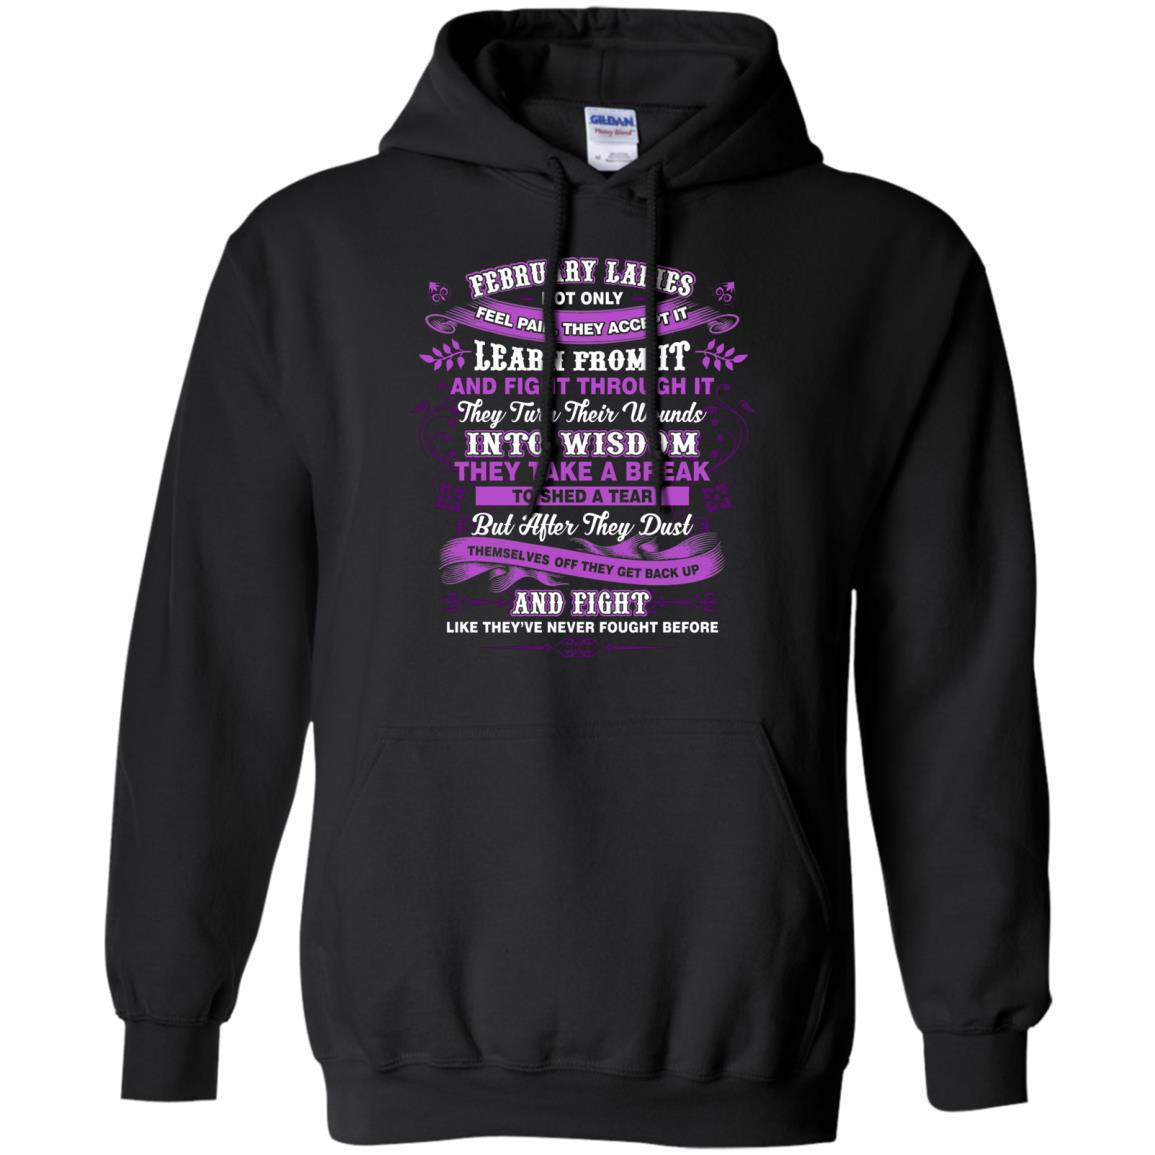 February Ladies Shirt Not Only Feel Pain They Accept It Learn From It They Turn Their Wounds Into WisdomG185 Gildan Pullover Hoodie 8 oz.